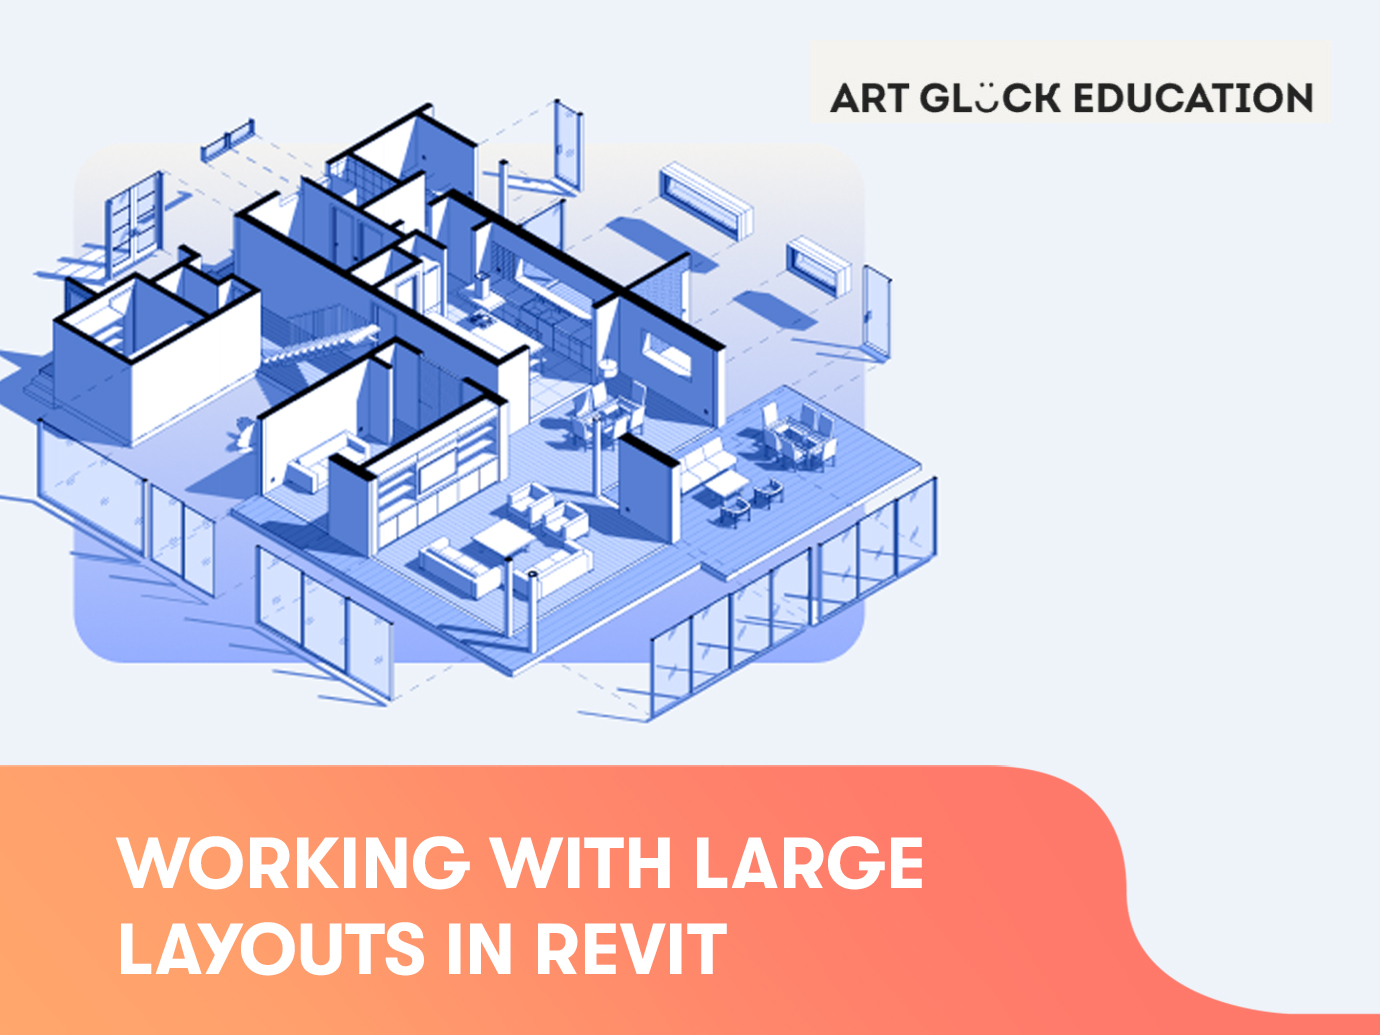 WORKING WITH LARGE LAYOUTS IN REVIT